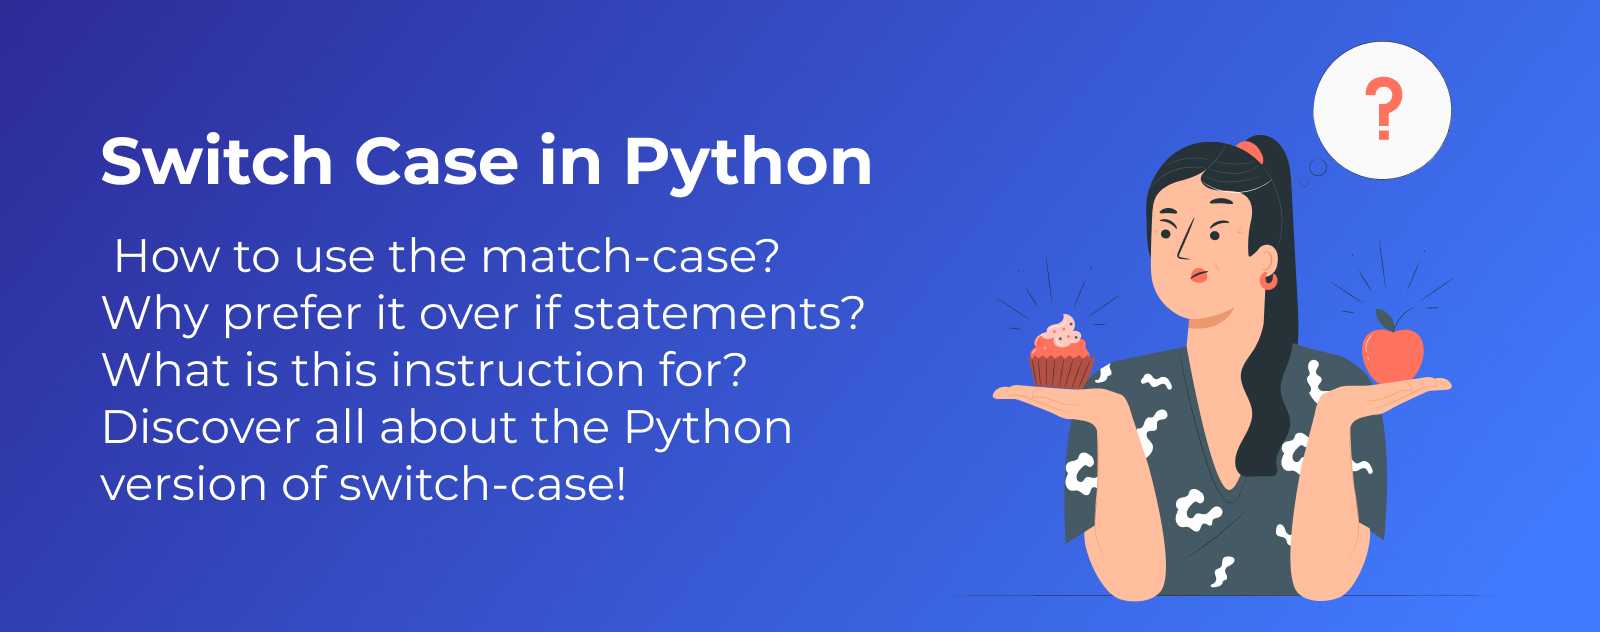 Switch Case in Python using the match statement